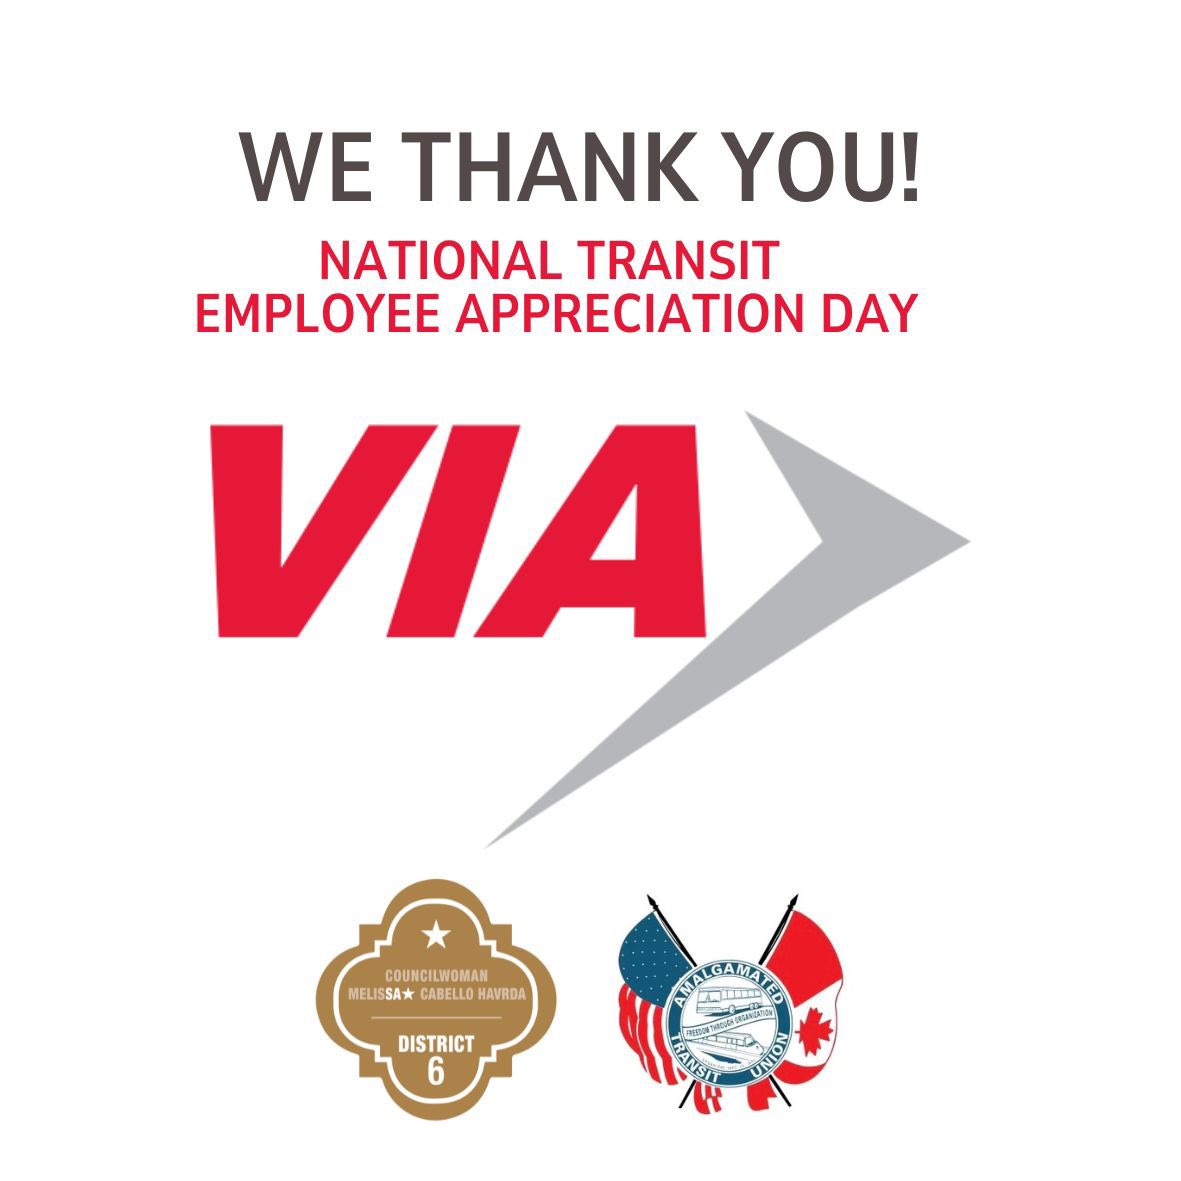 We thank VIA Transit Drivers and frontline employees dedicated to ensure our San Antonio residents have the best transportation services available. Transportation is a critical element of our future growth. #MelisSAinSA #AccelerateSA #SATX #TransitEmployeeAppreciationDay